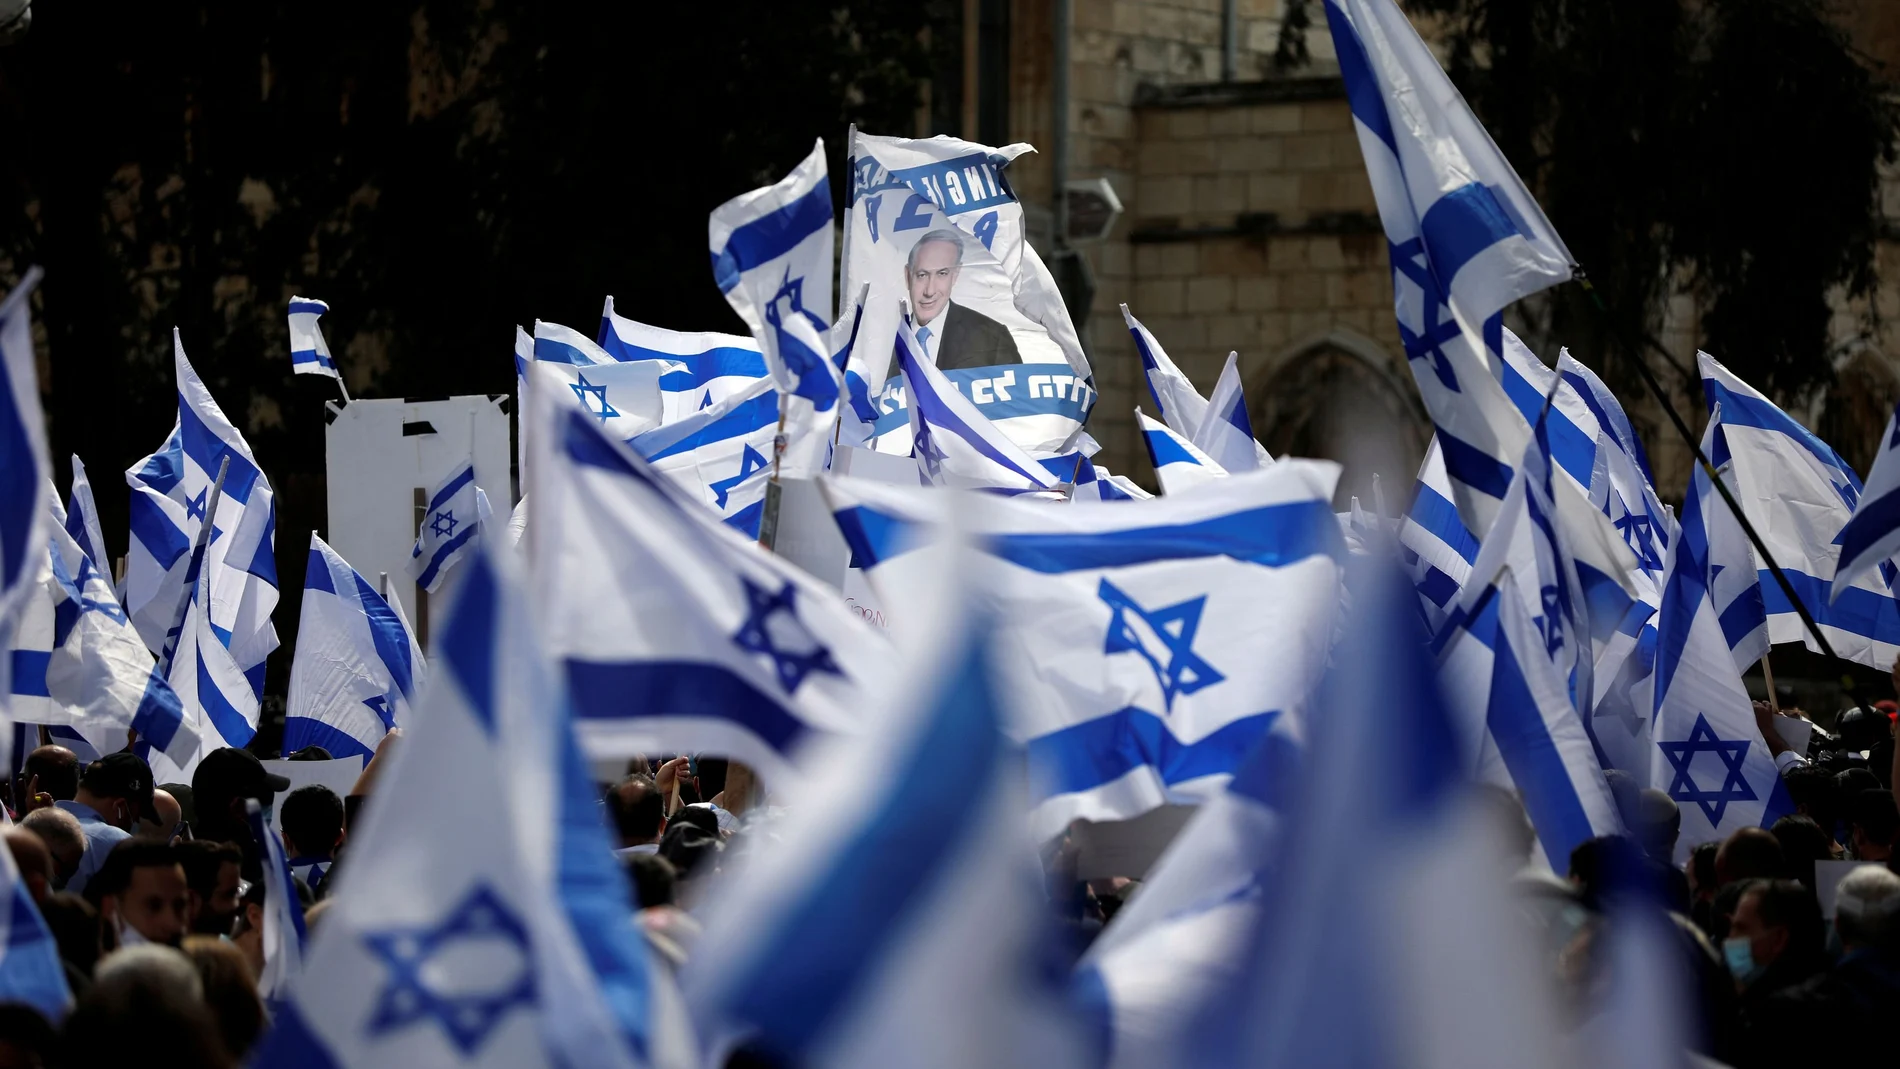 Supporters of Israeli Prime Minister Benjamin Netanyahu wave Israeli flags during a rally as Netanyahu's corruption trial opens, near the Jerusalem District Court